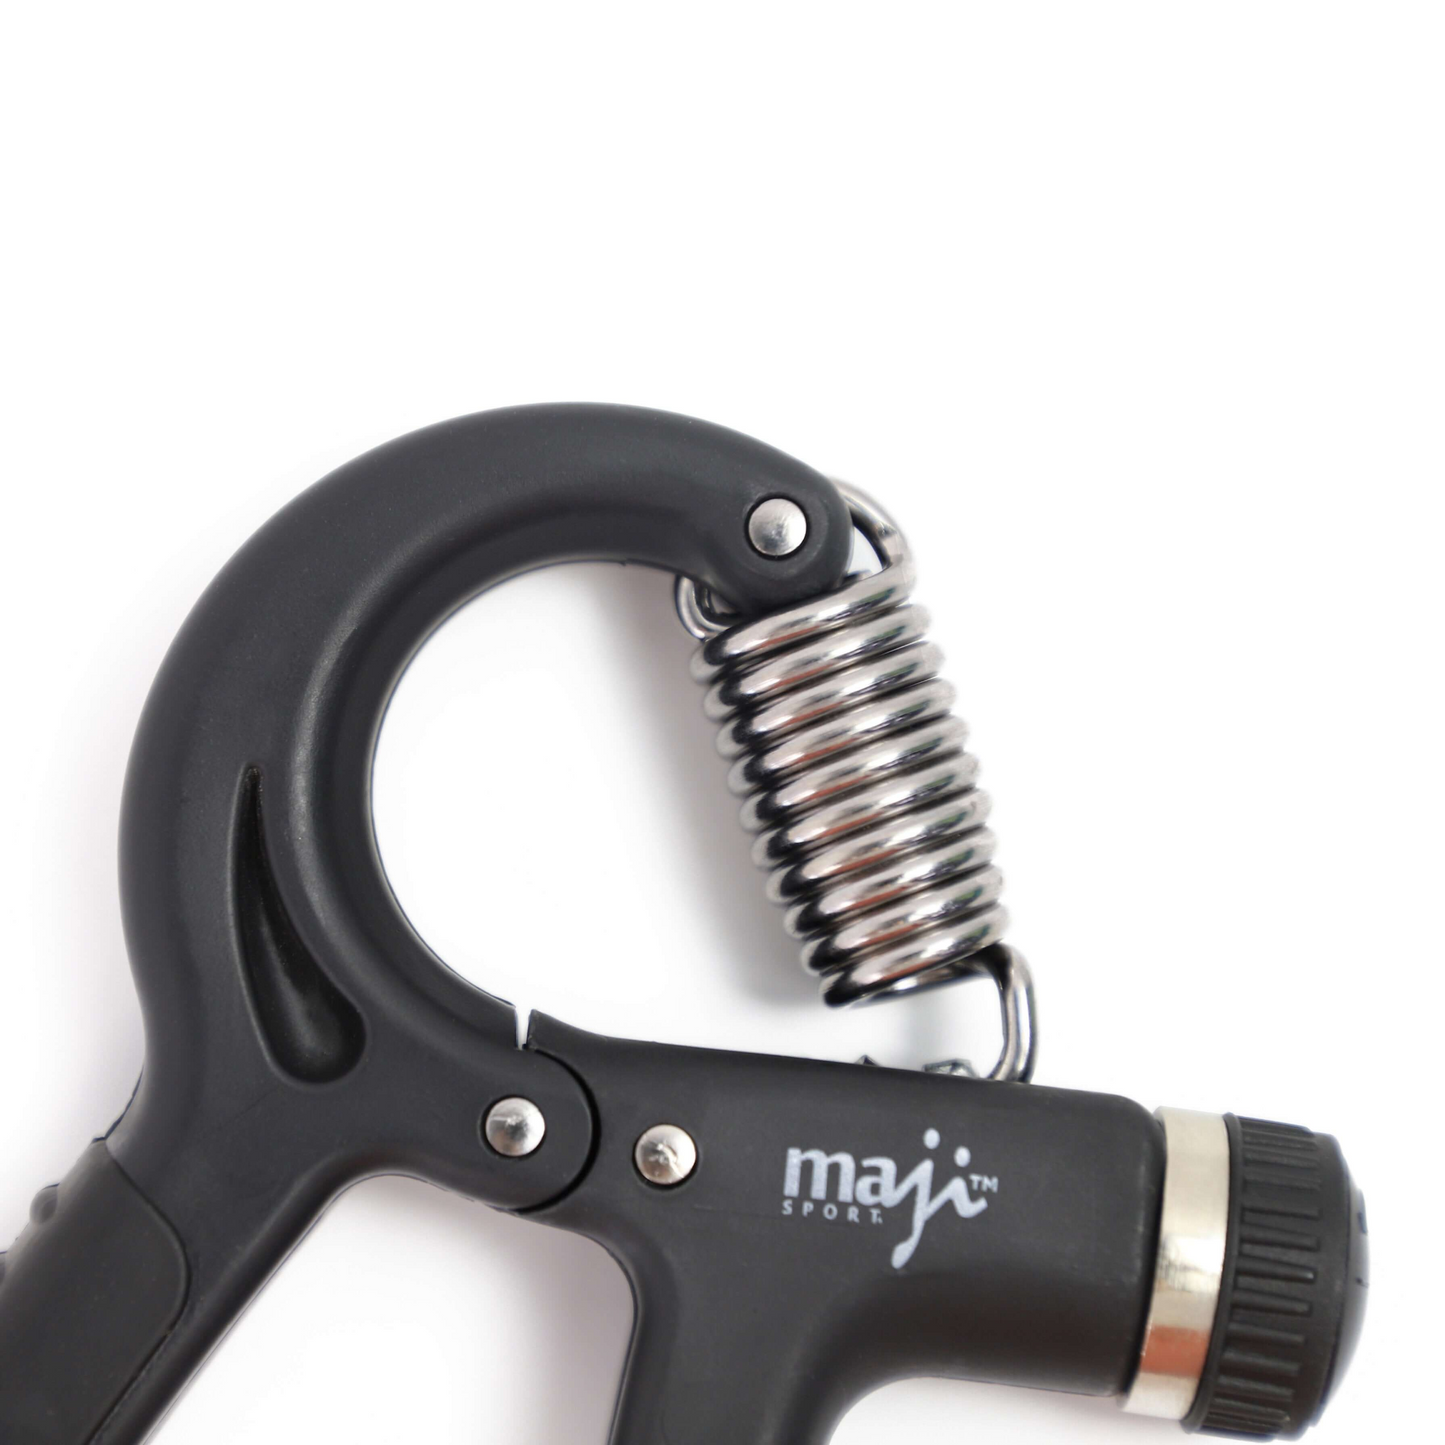 Maji Sports Hand Grip for Forearm Muscularity and Hand Endurance